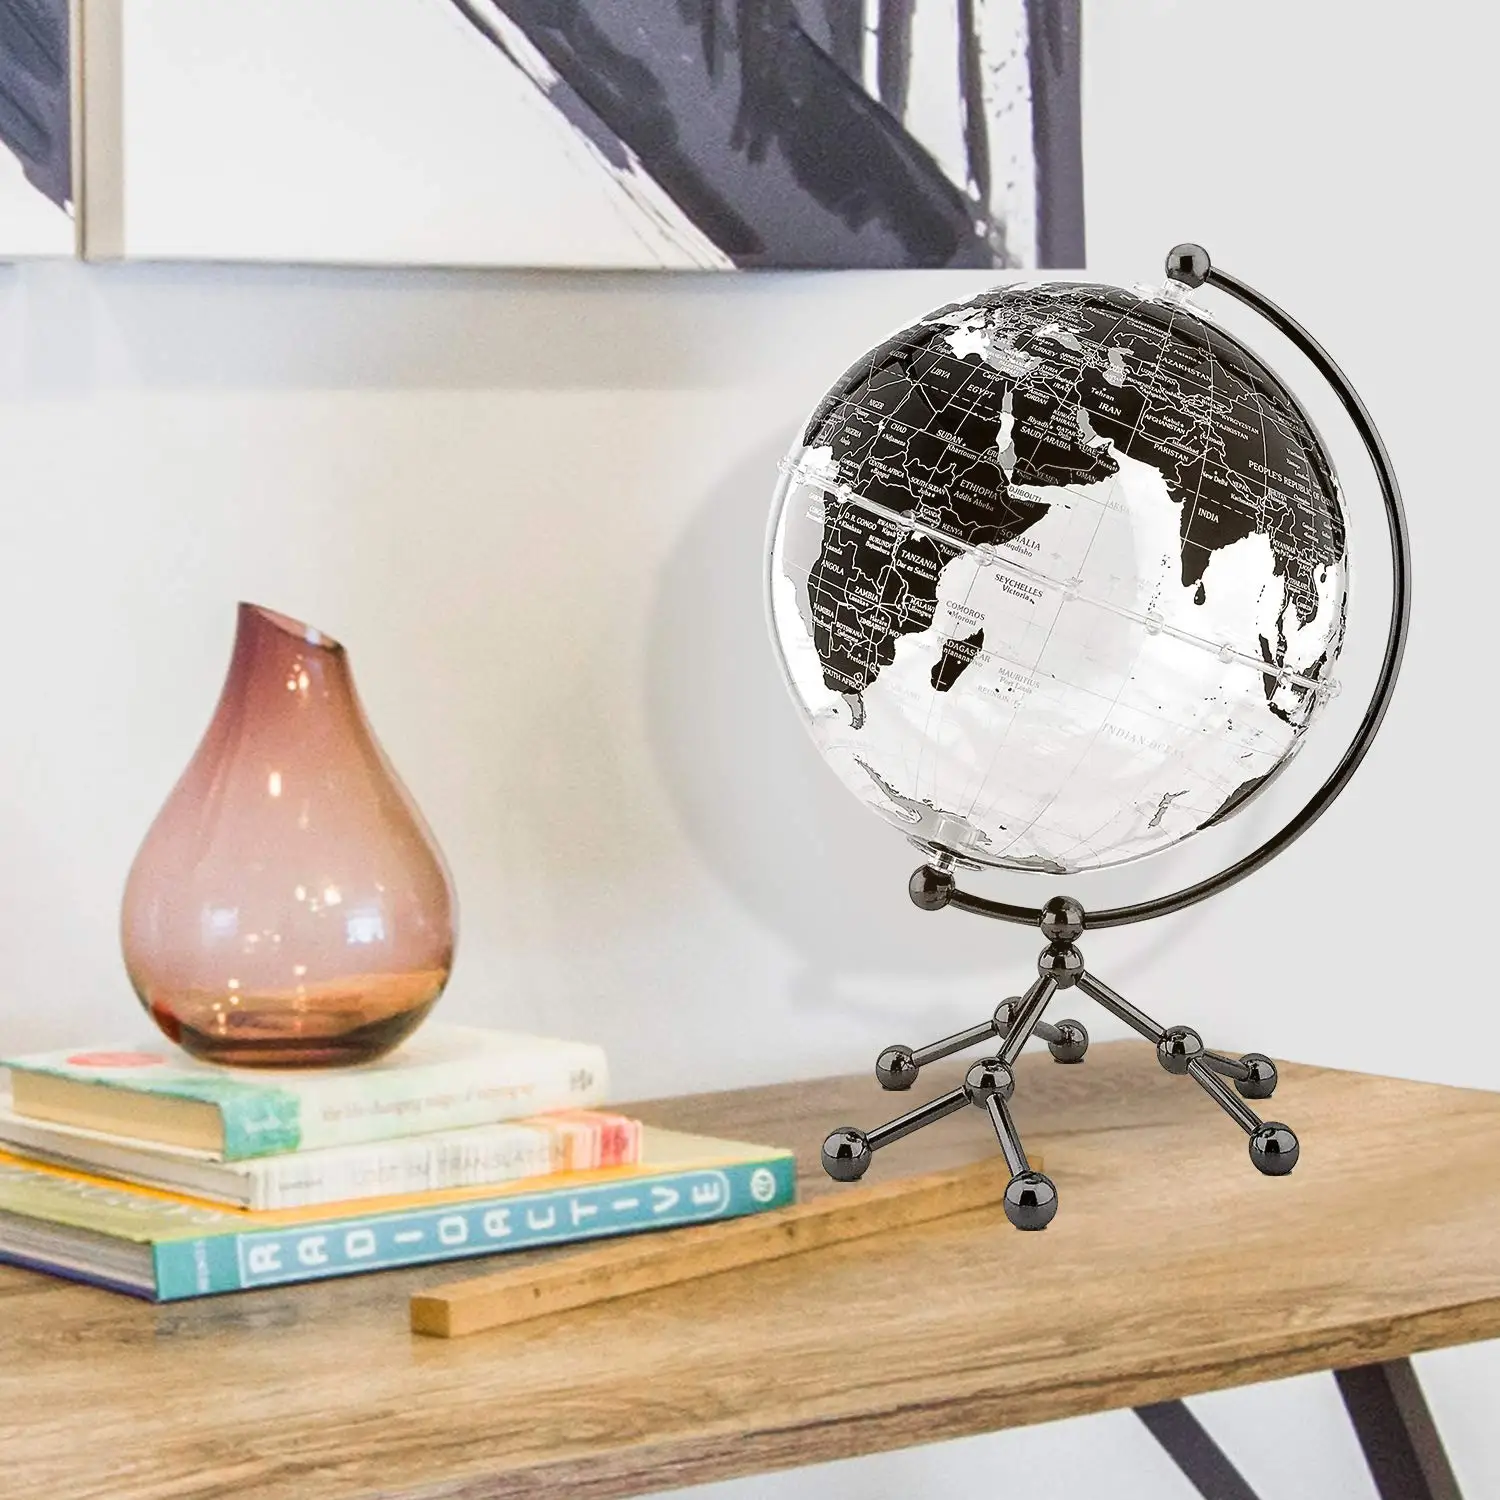 1pc Clear Crystal Earth Globe Decorative Ornament For Home, Photo